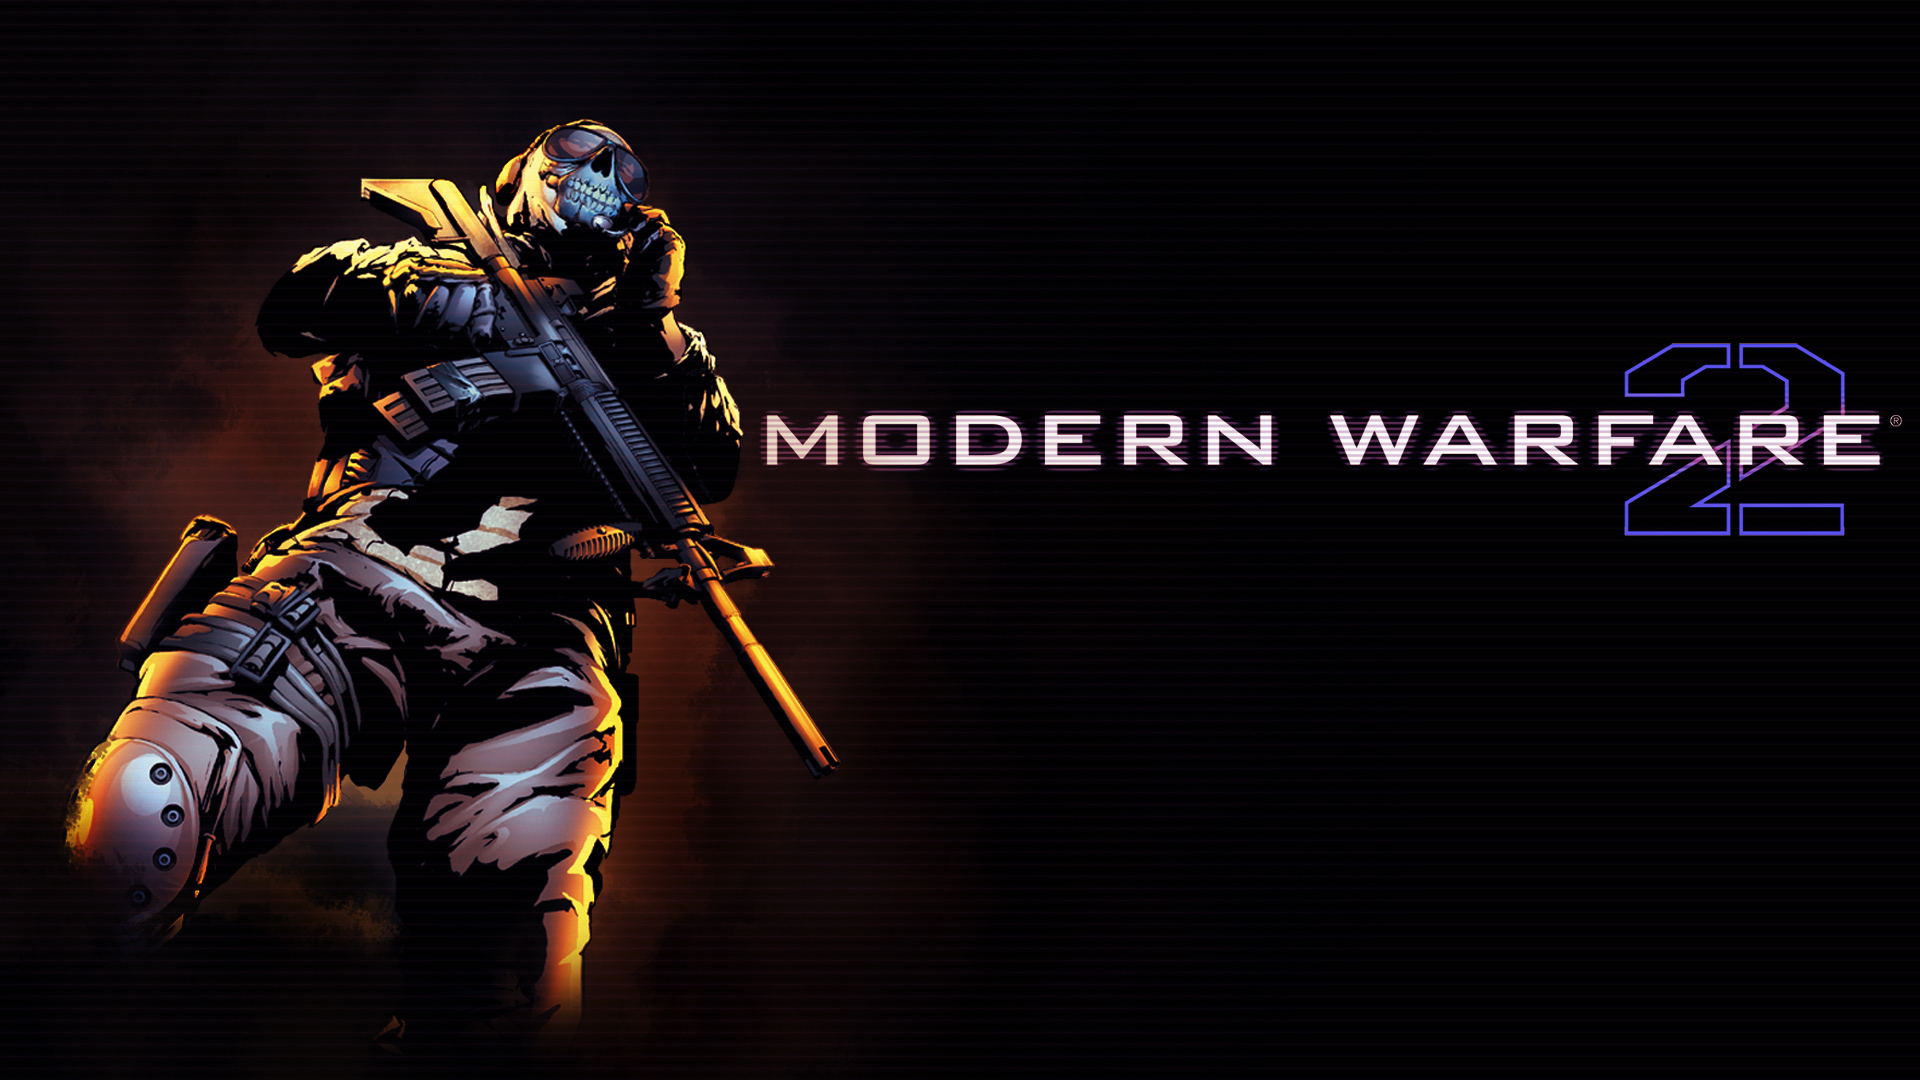 Call Of Duty: Modern Warfare 2 Wallpapers, Pictures, Images